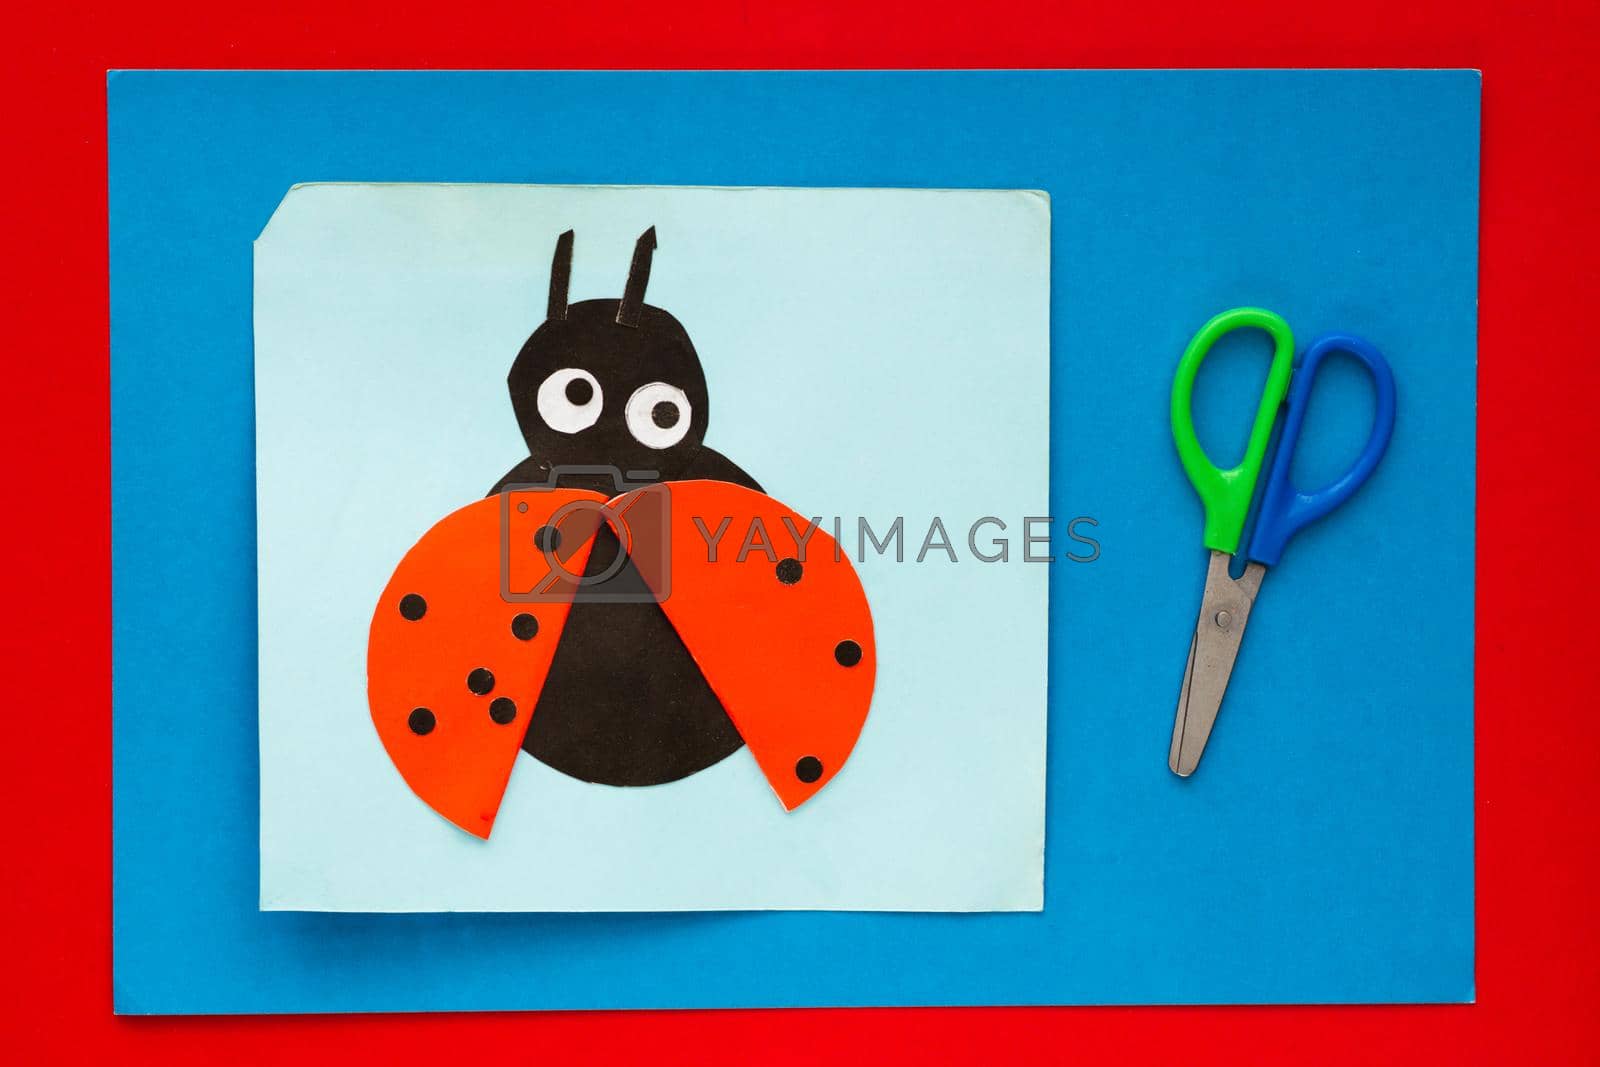 Royalty free image of Ladybug made from paper by child on multicolor sheets background by TatianaFoxy